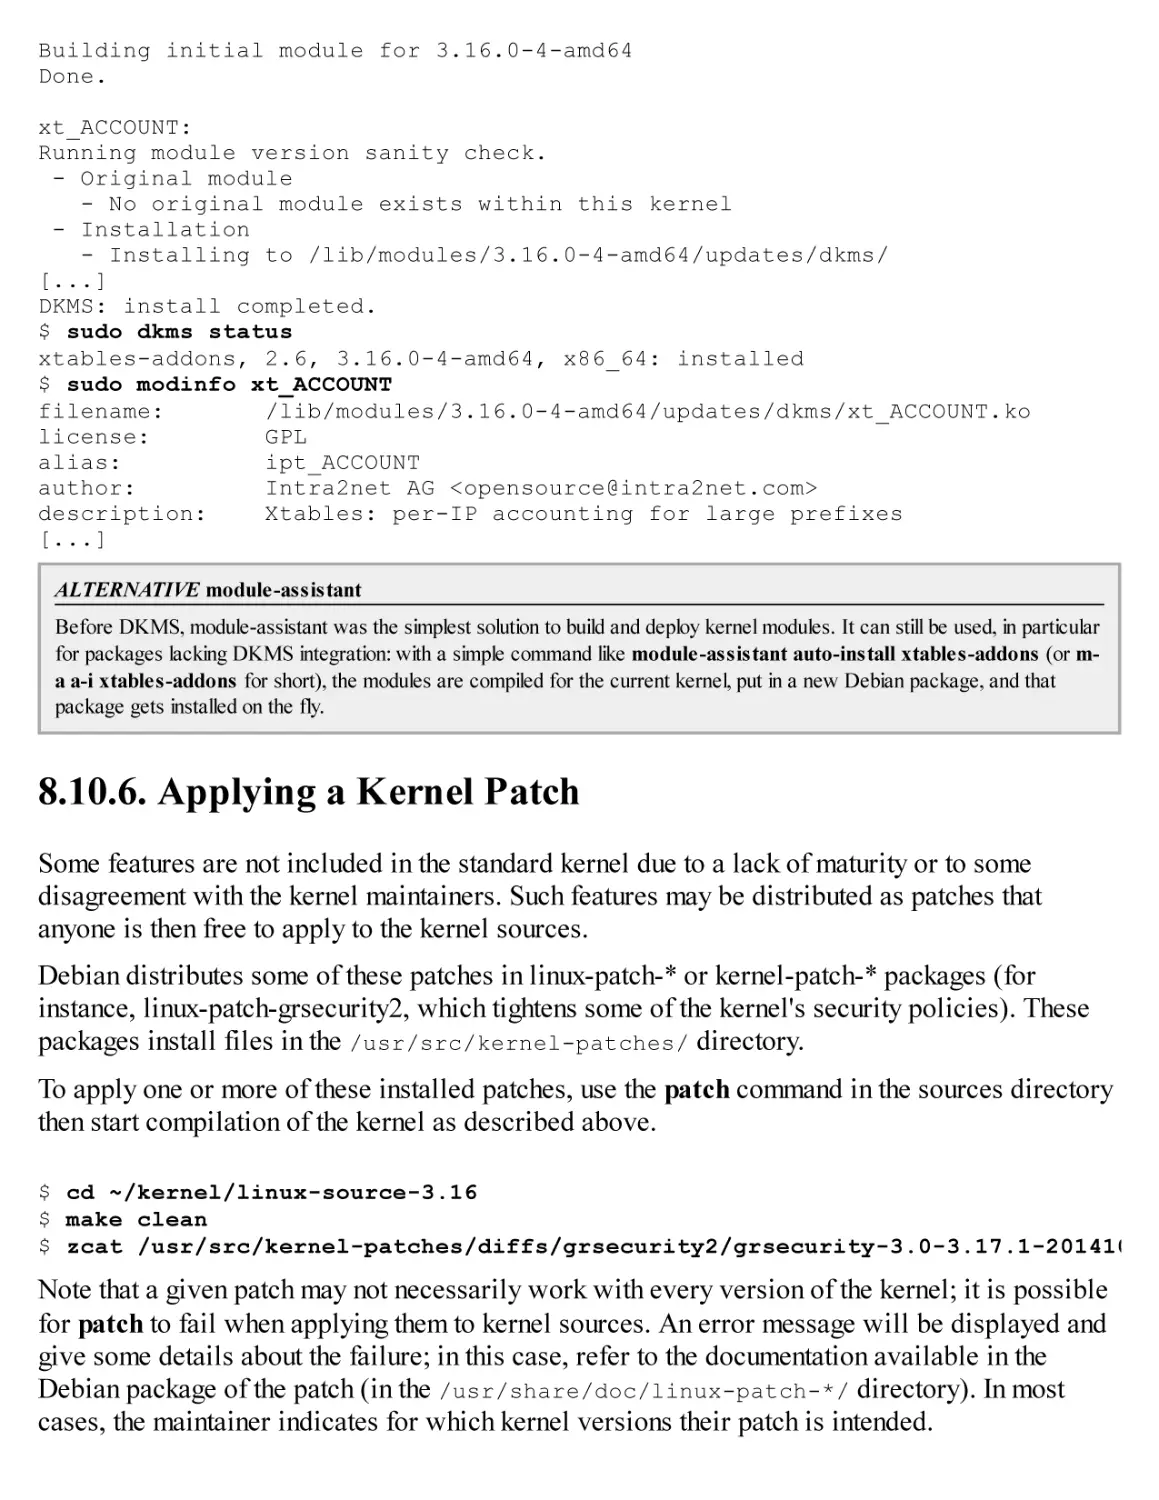 8.10.6. Applying a Kernel Patch